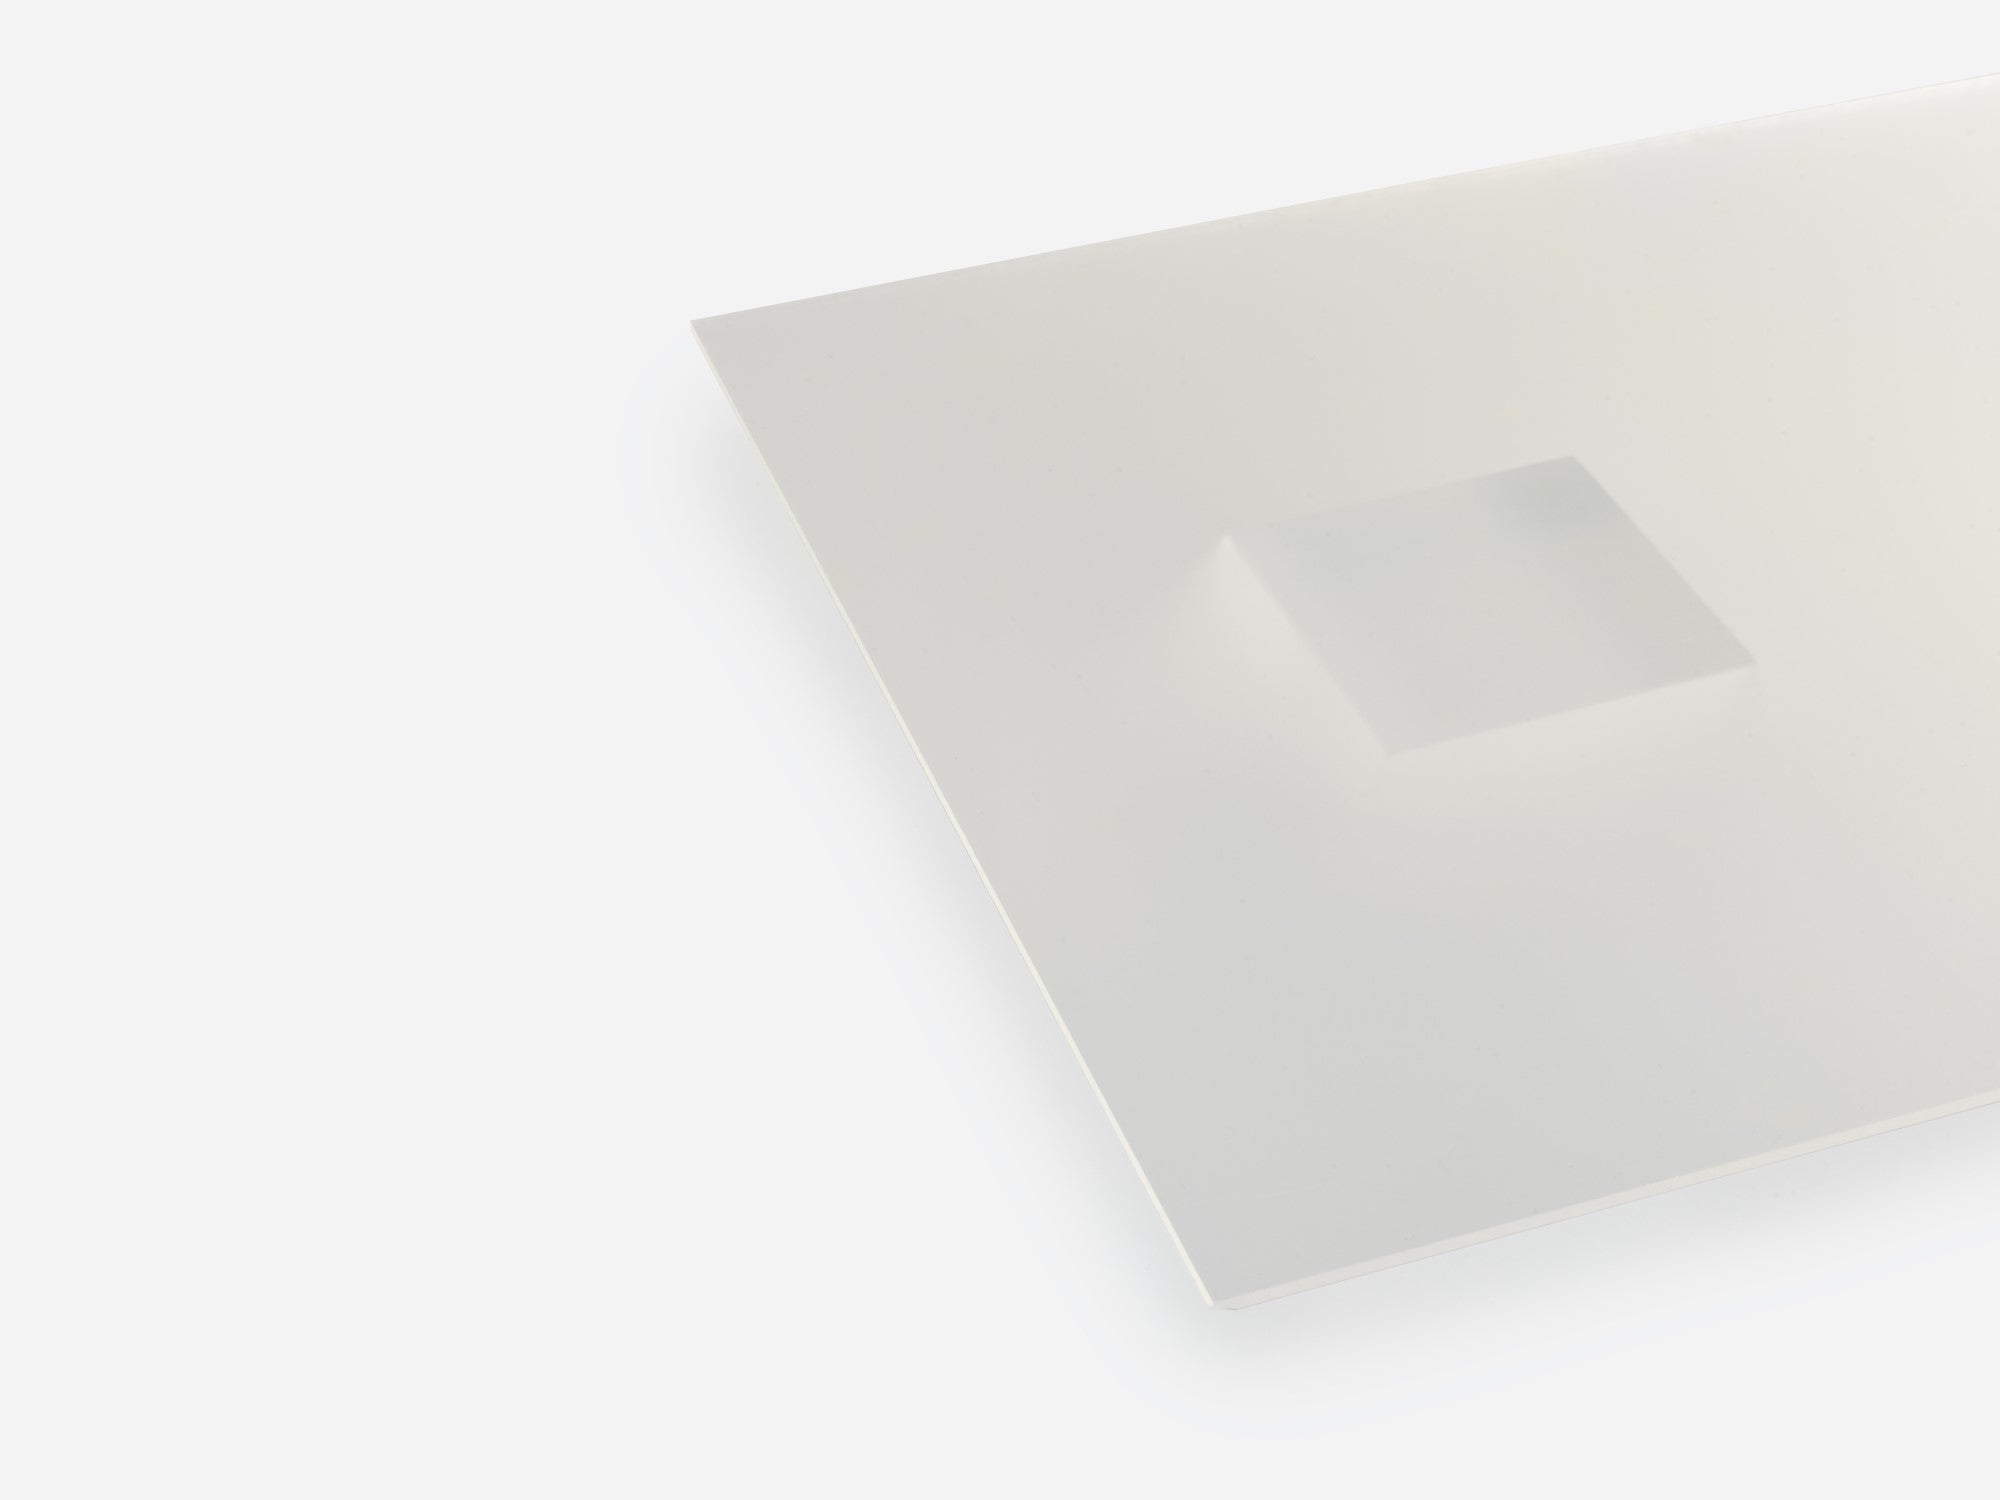 CLEAR COLORLESS DP9 MATTE ACRYLIC SHEET